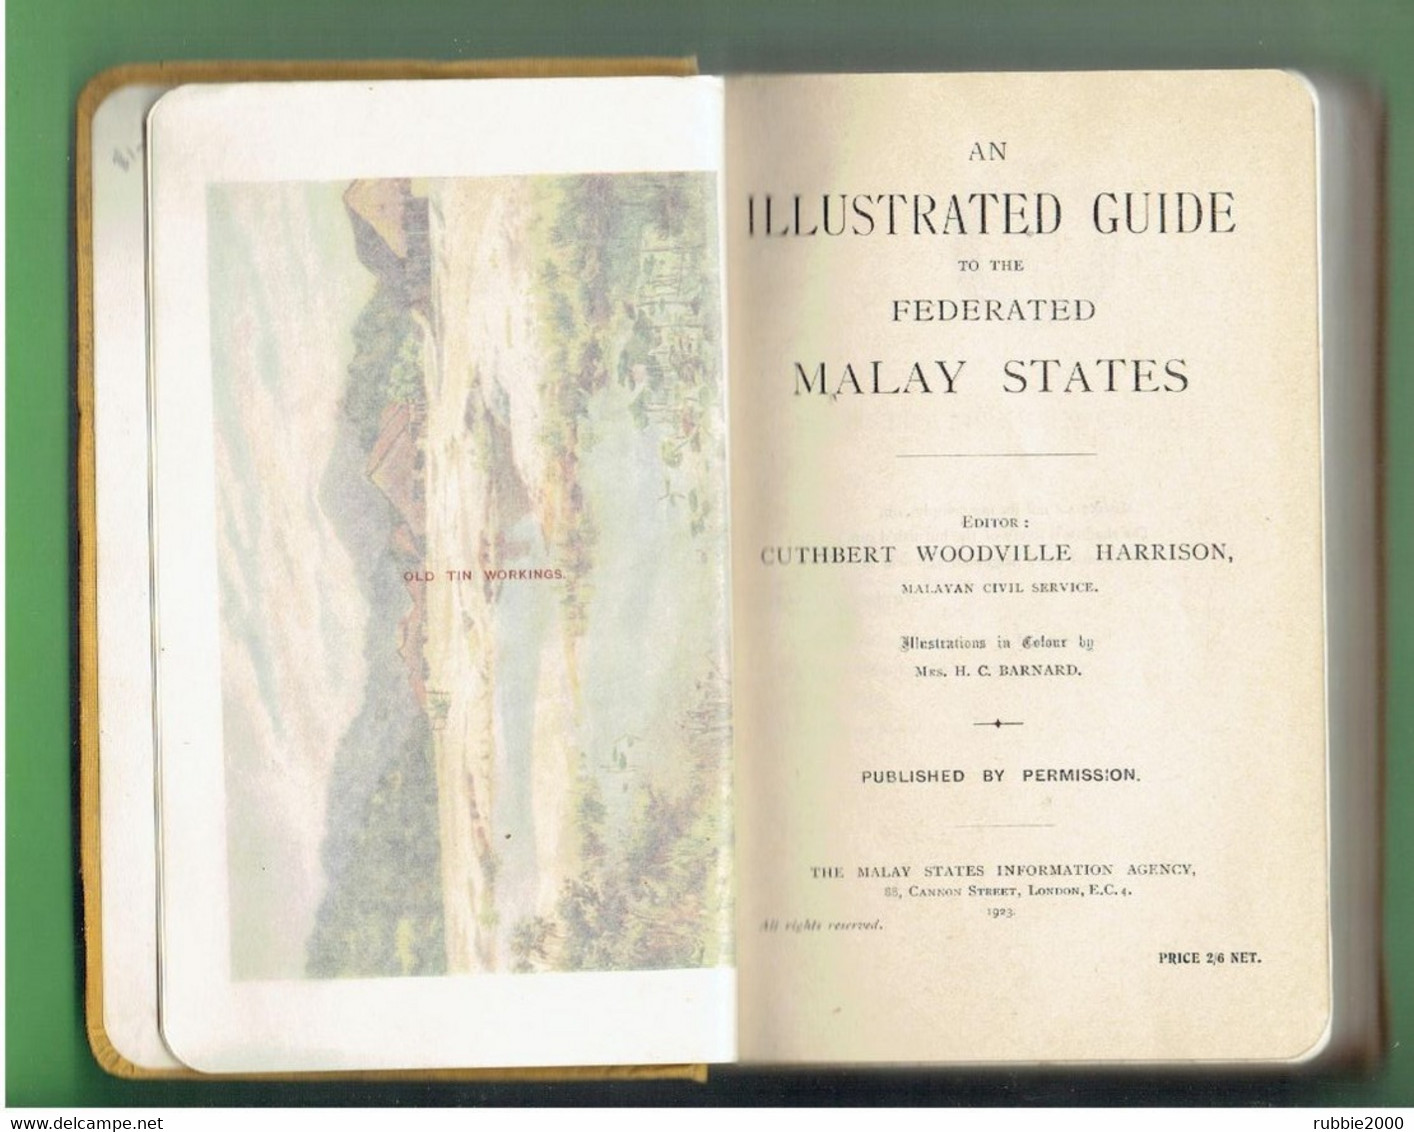 ILLUSTRATED GUIDE TO THE FEDERATED MALAY STATES 1923 CUTHBERT WOODVILLE HARRISON GUIDE ILLUSTRE DE LA MALAISIE - 1900-1949